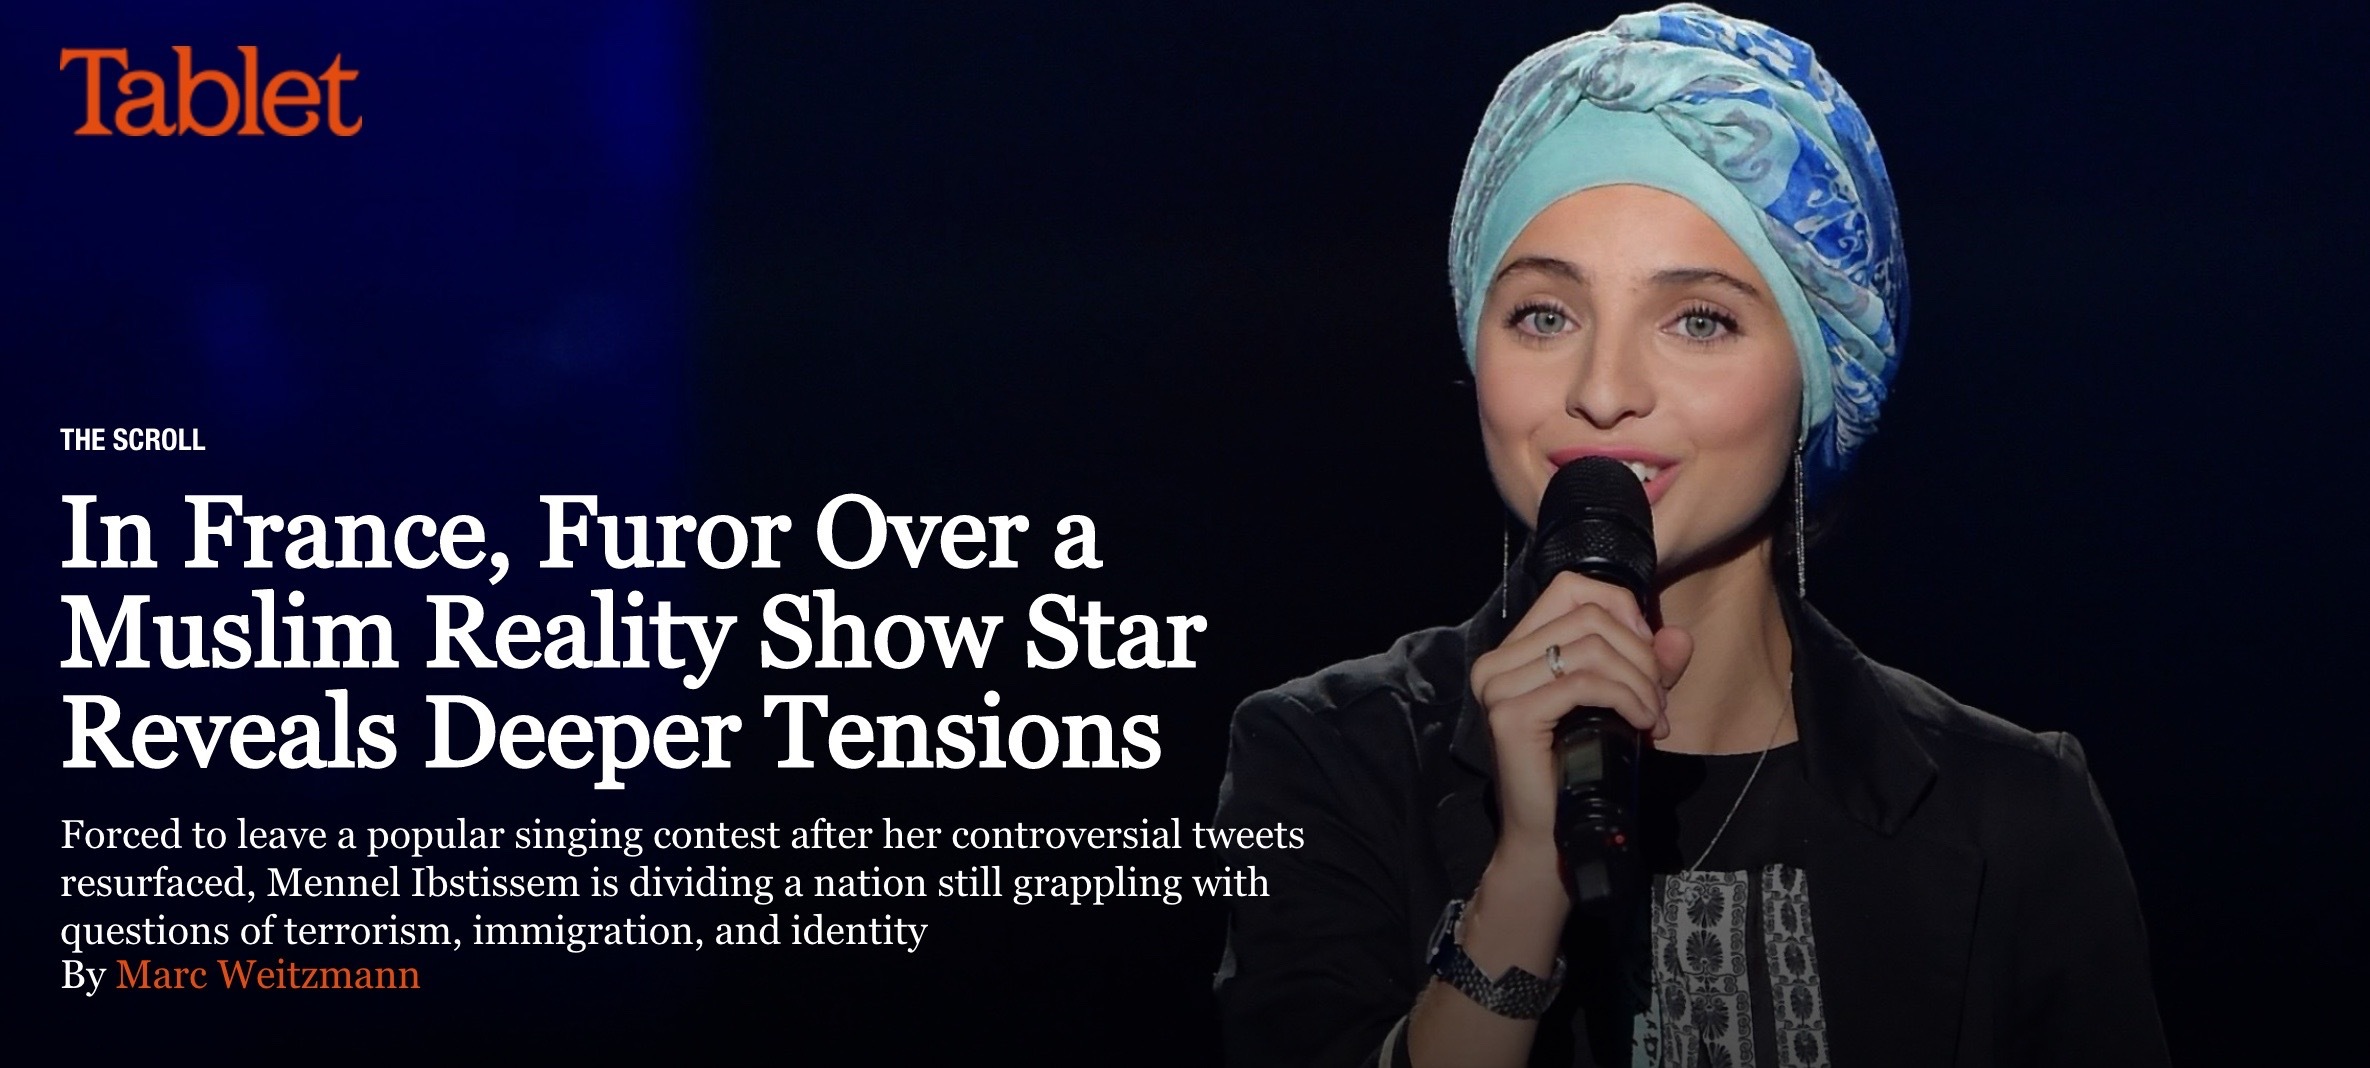 In France, Furor Over a Muslim Reality Show Star Reveals Deeper Tensions